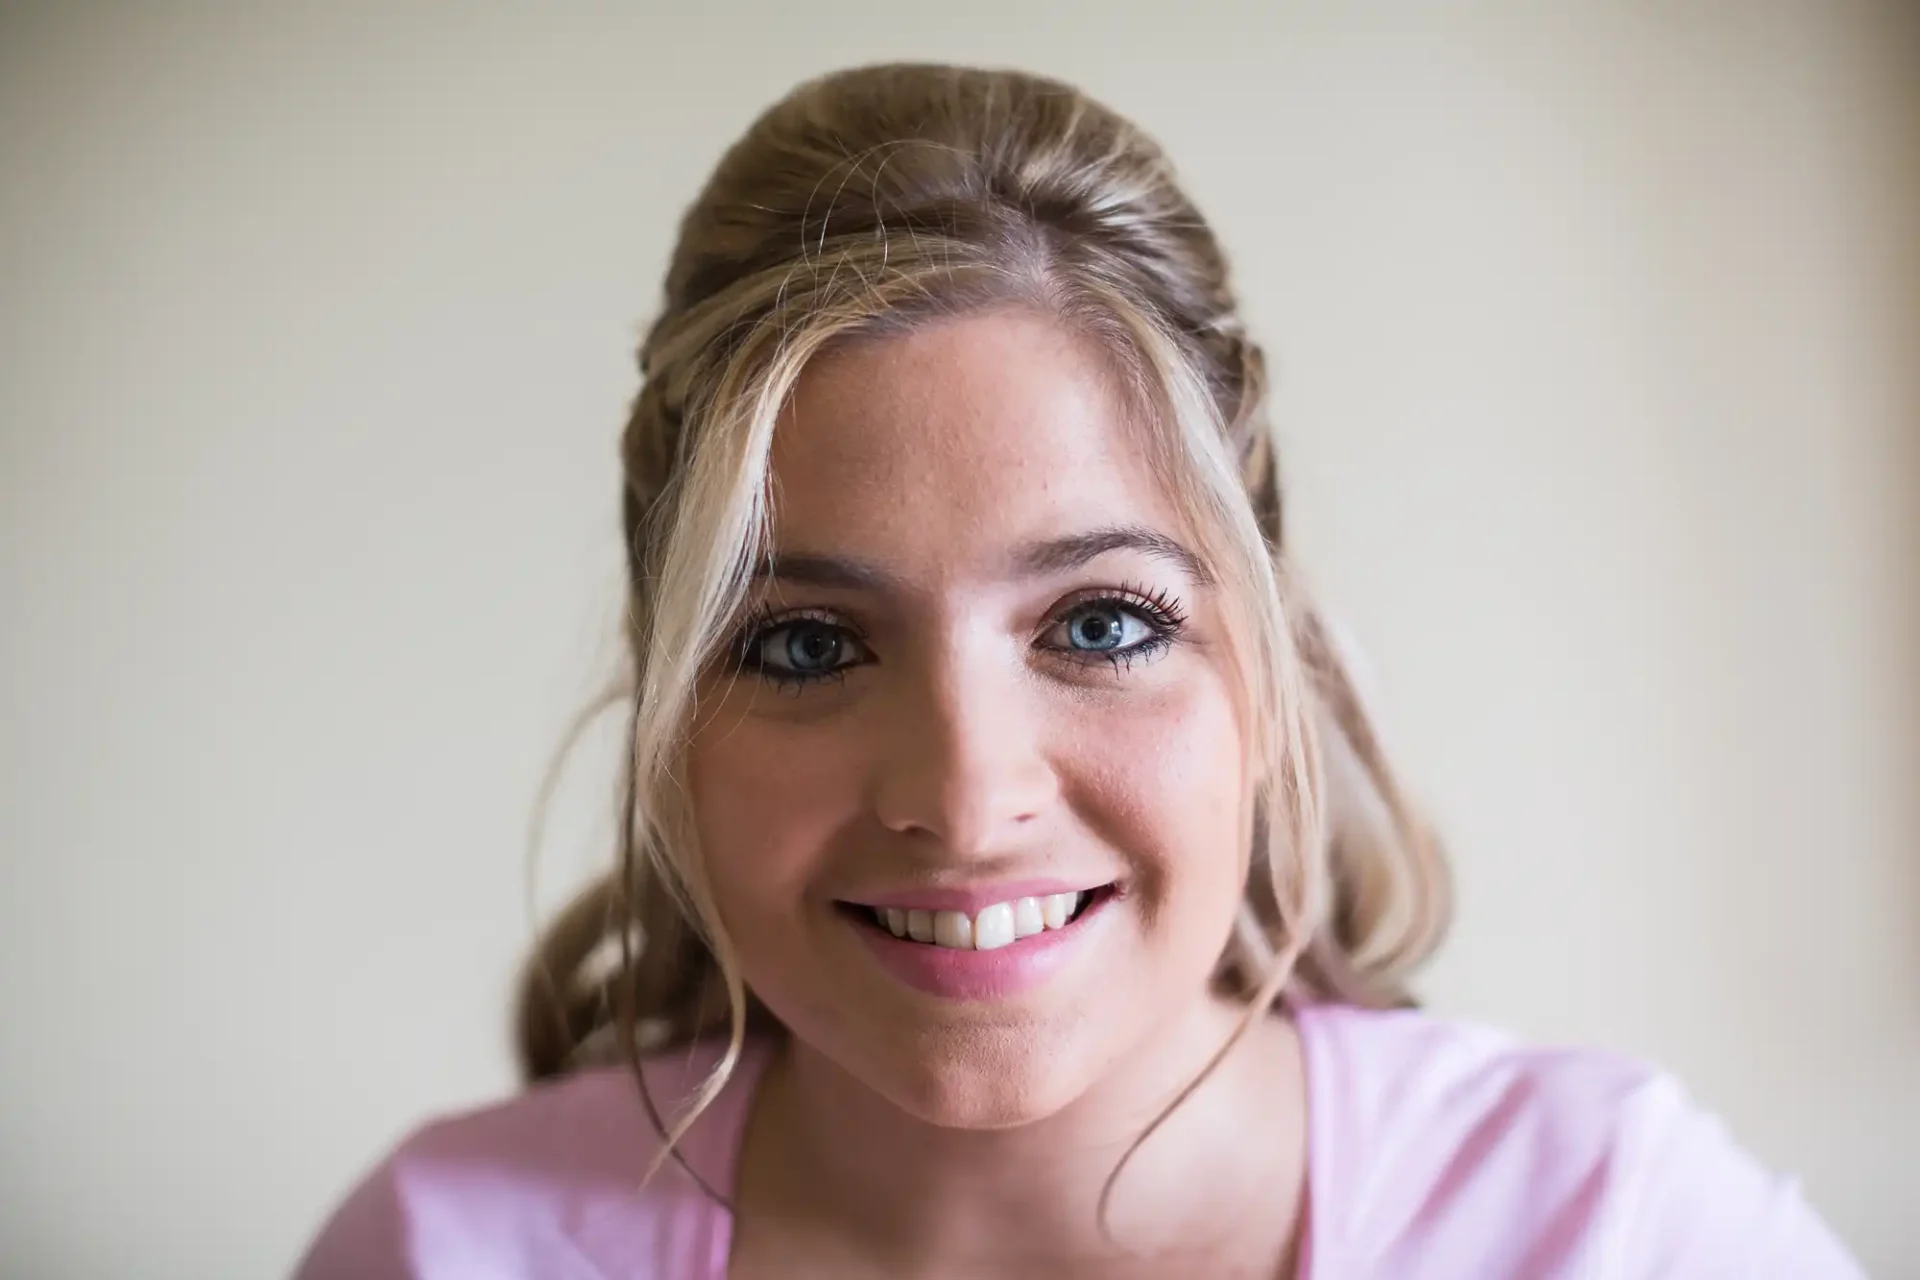 Close-up portrait of a smiling woman with blonde hair styled in an updo, wearing a pink shirt, against a light background.